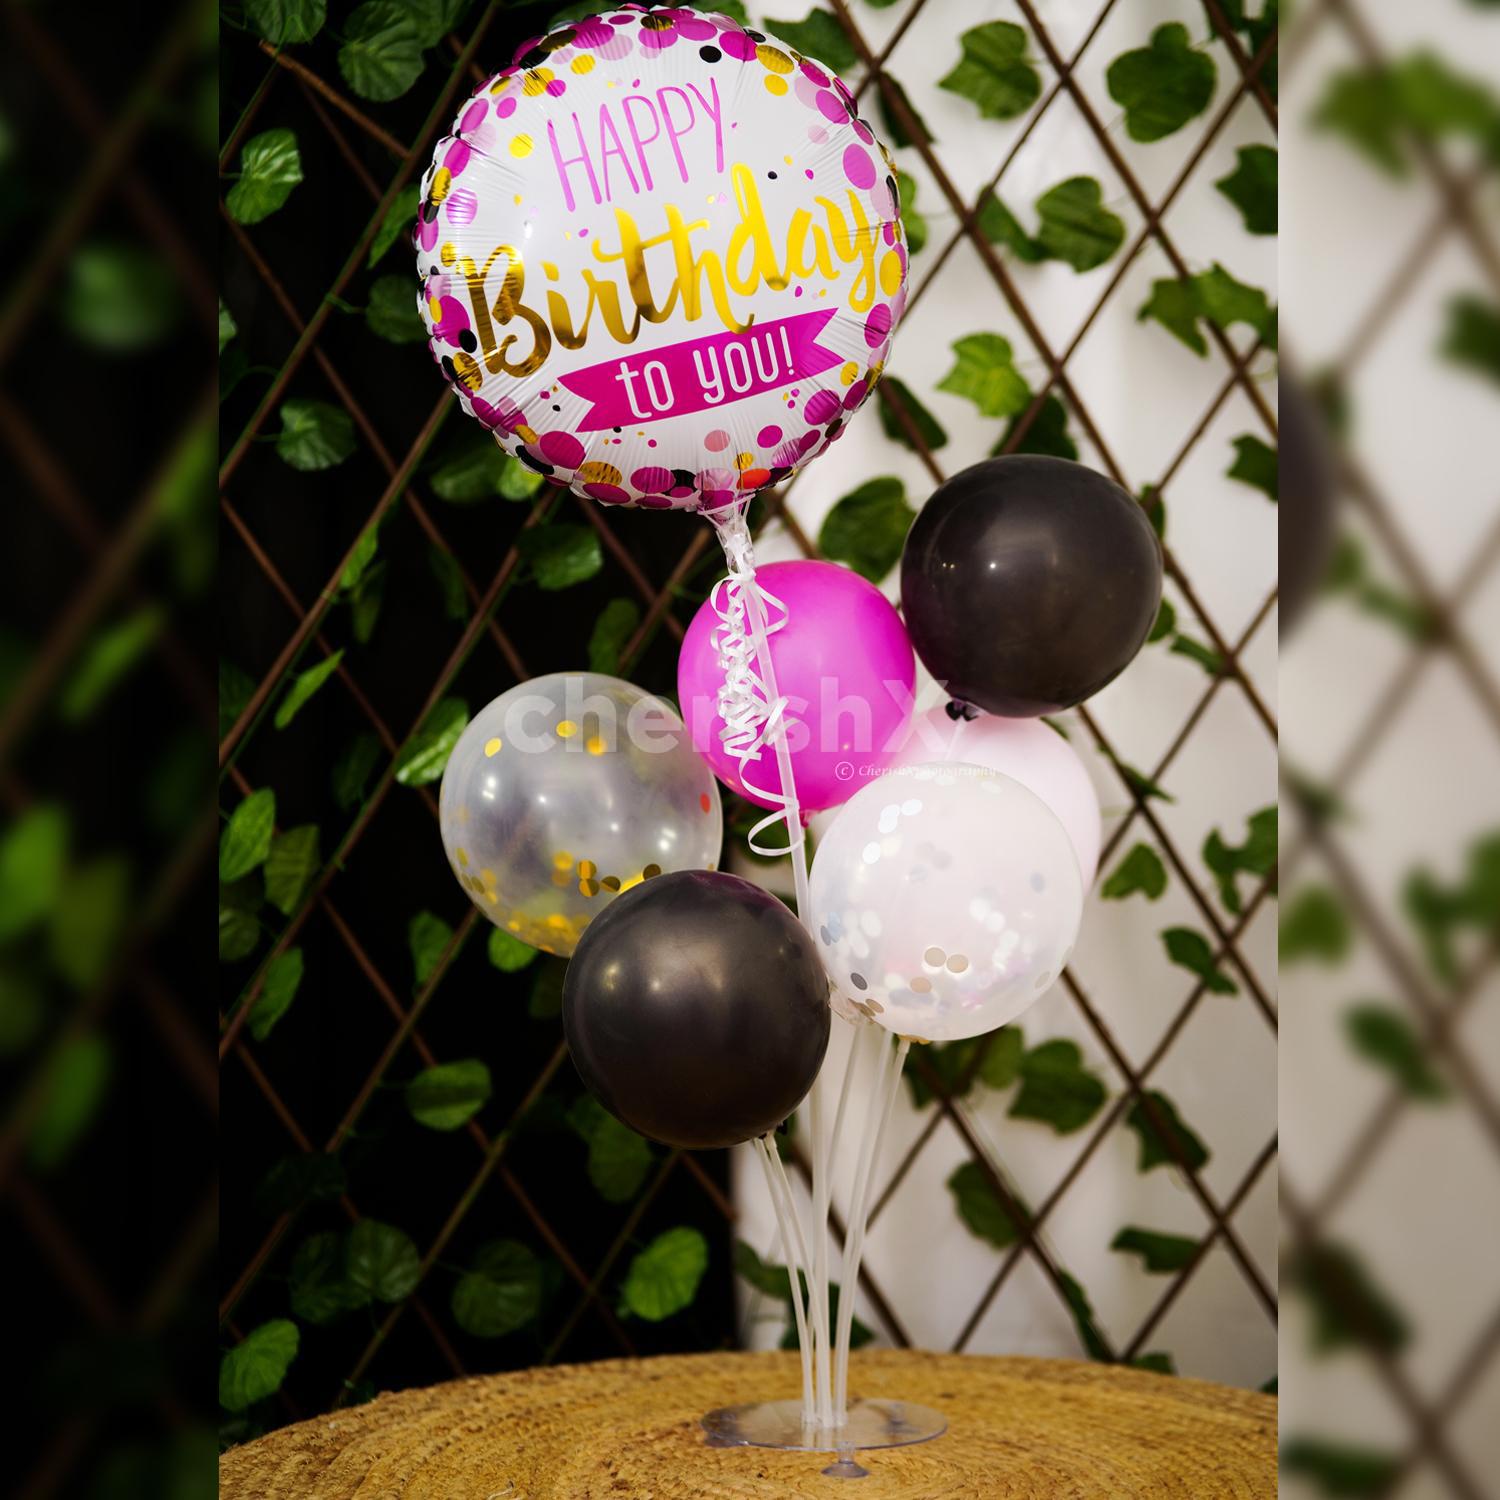 Have the happiest birthday with the happy birthday balloon bouquet!